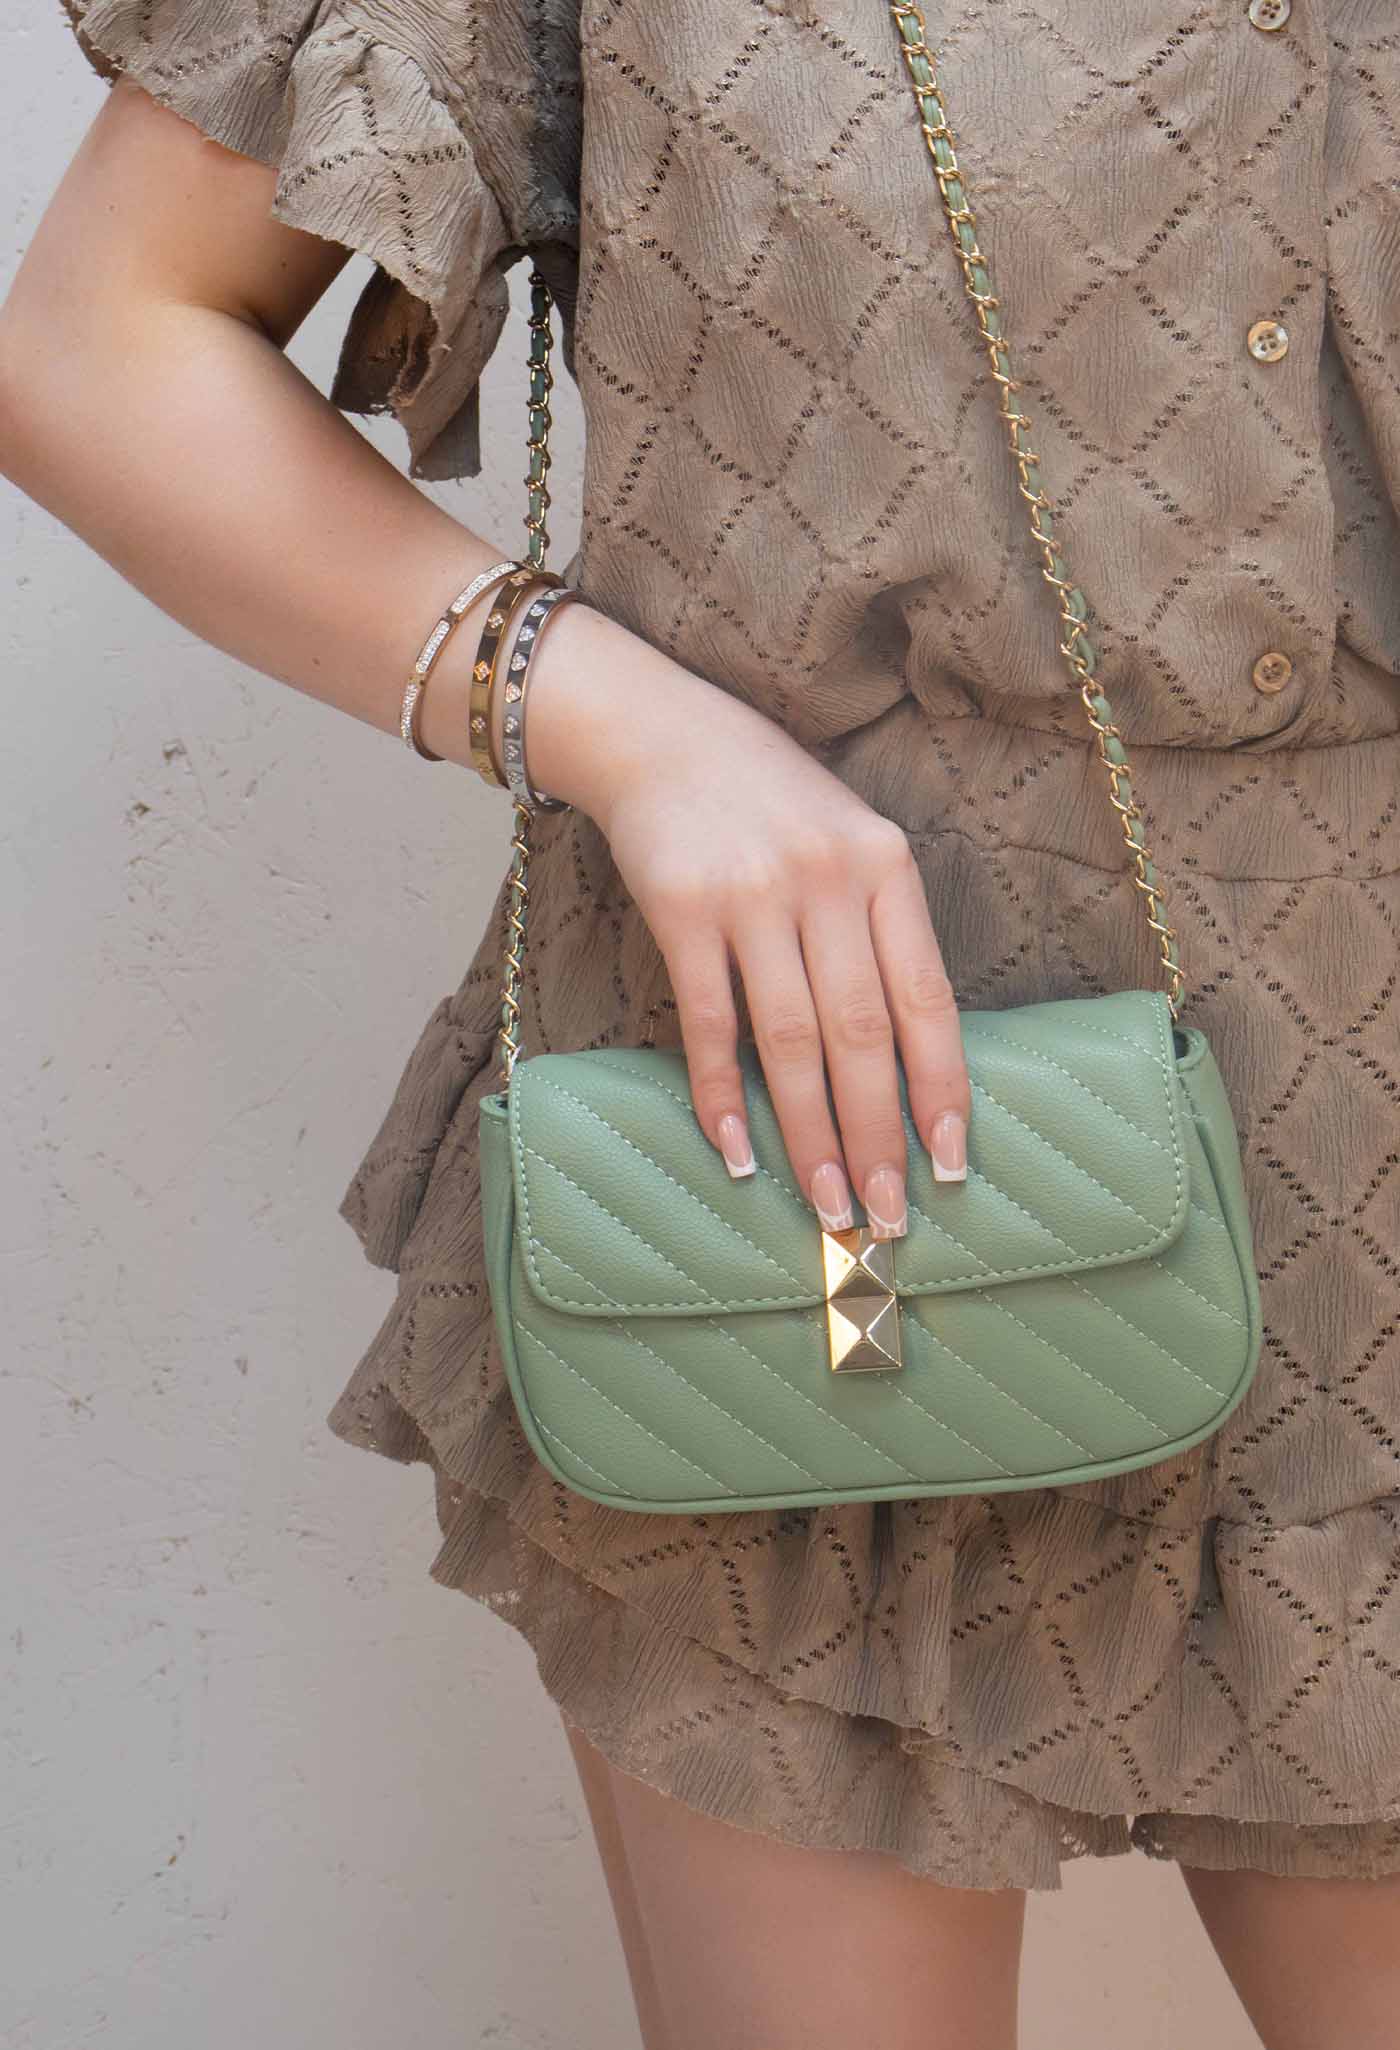 Quilted Patterned PU Leather Cross-Body Mint Bag